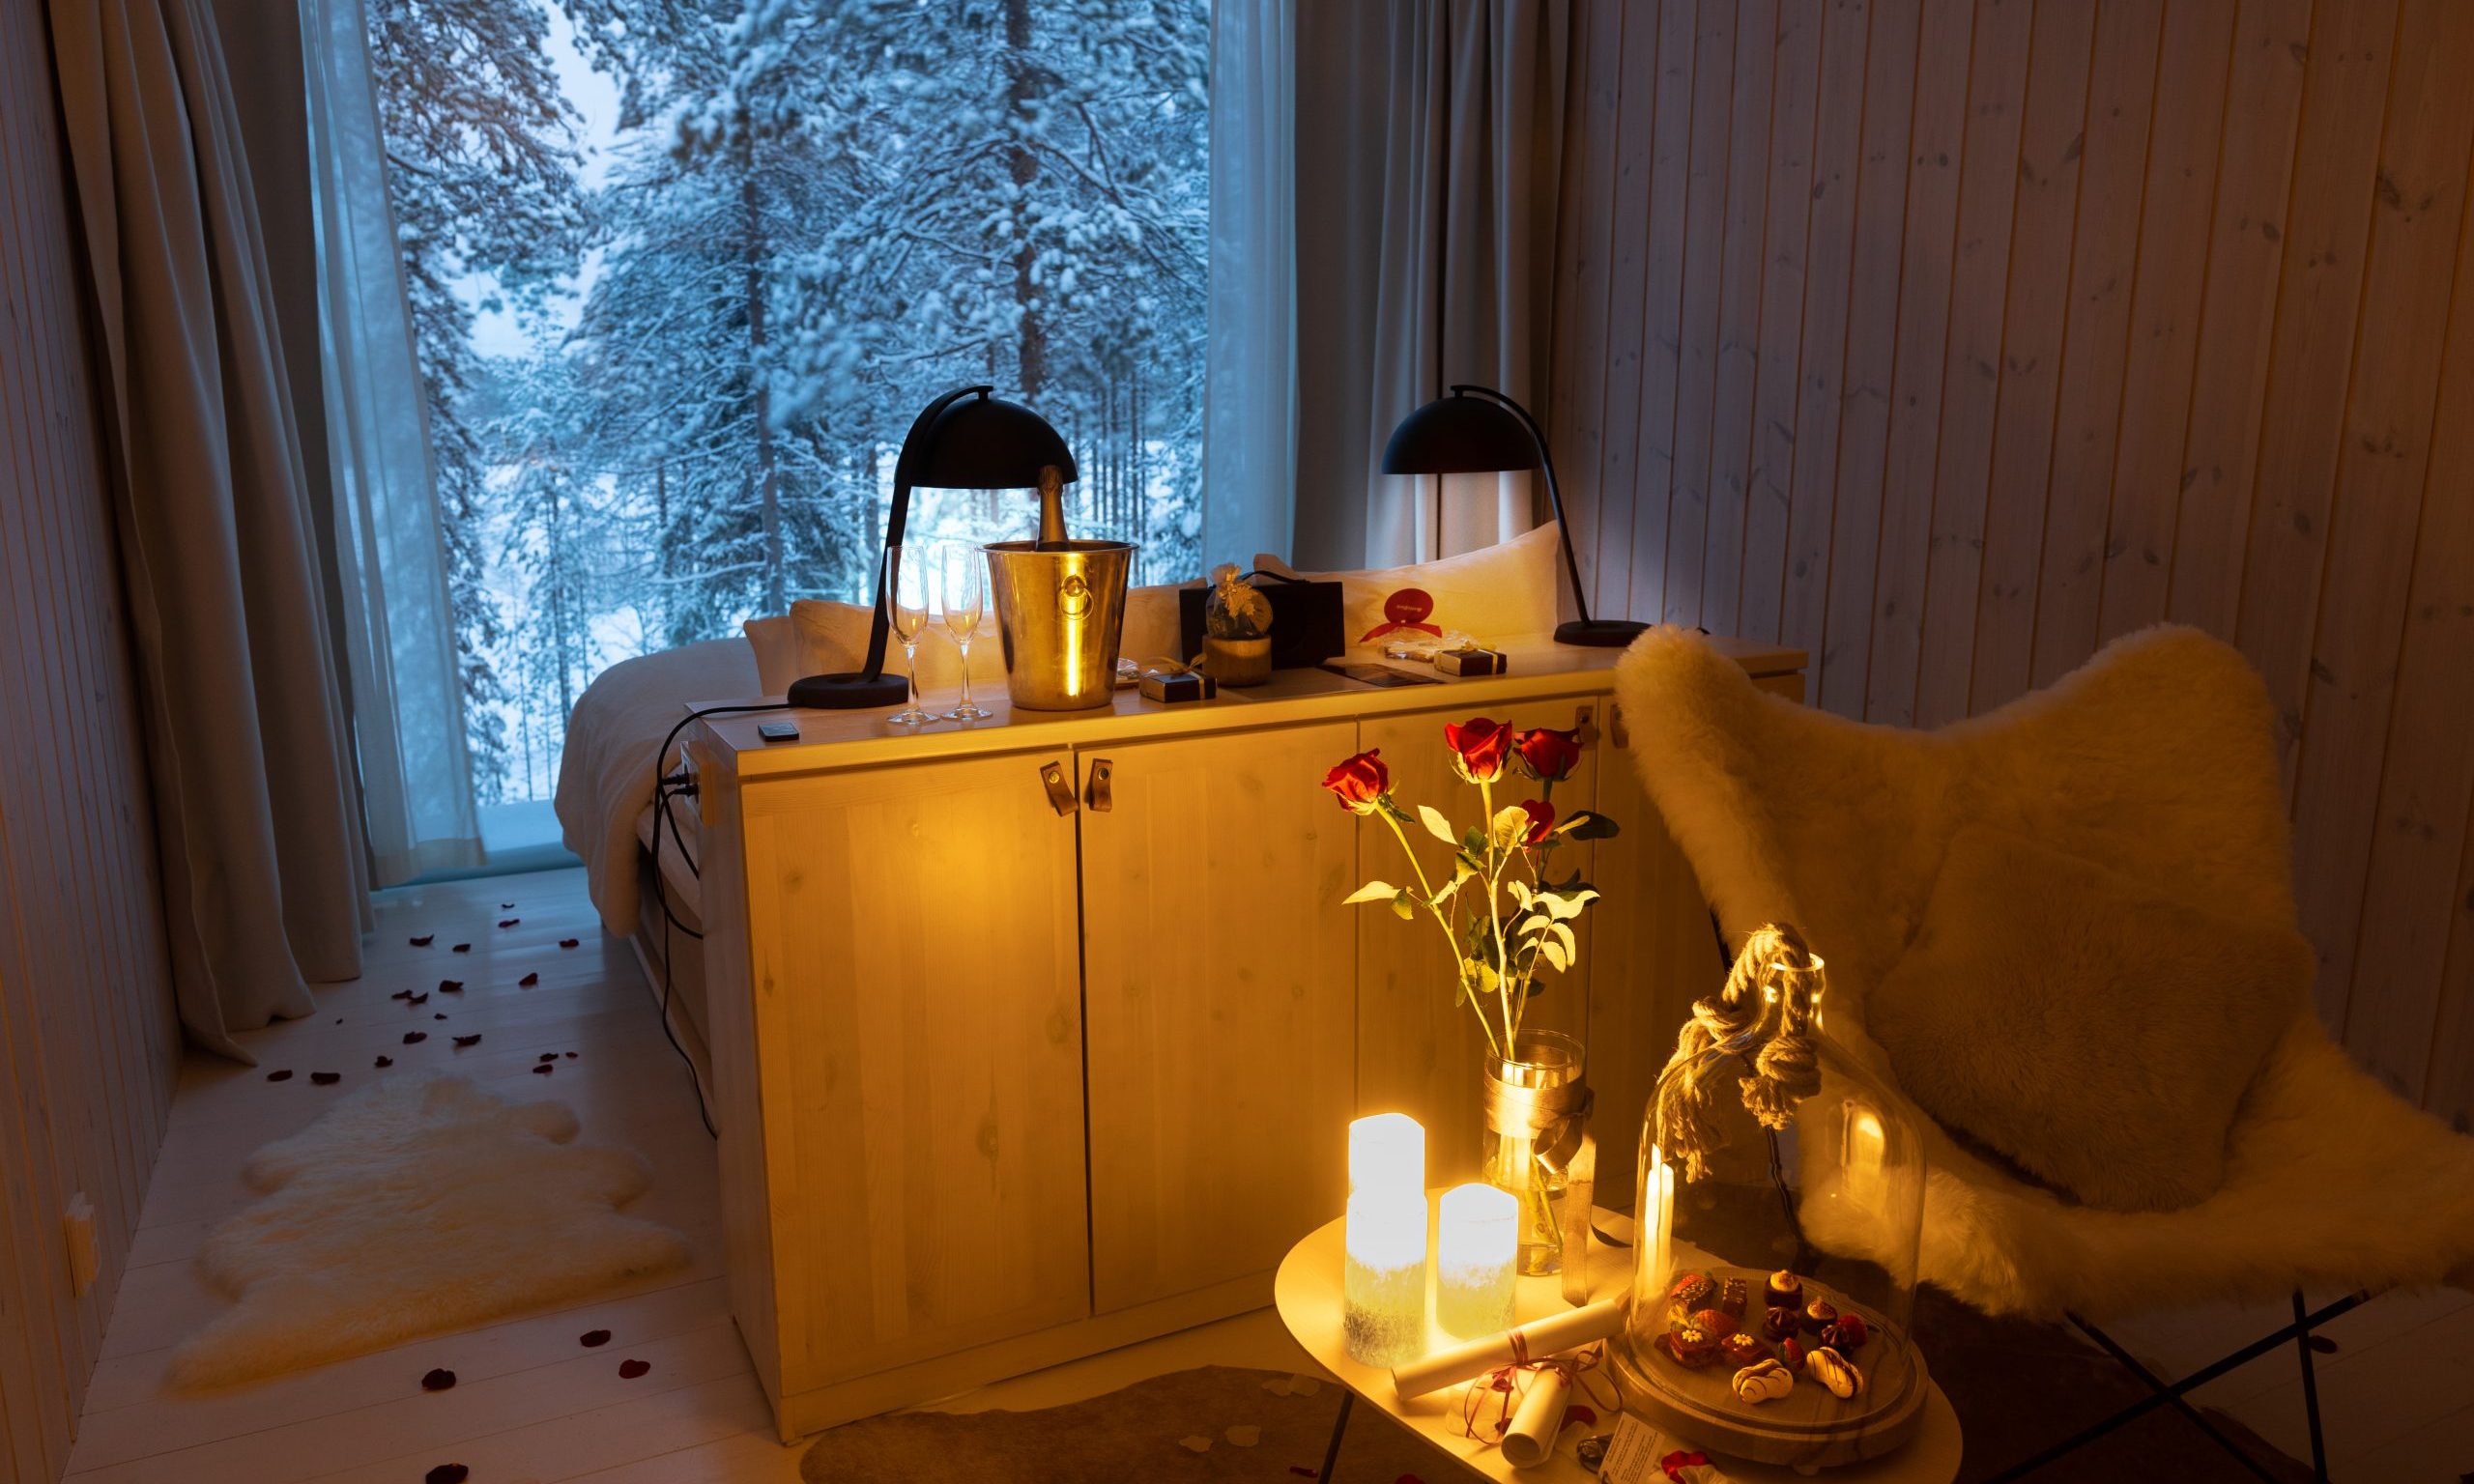 Romantic setting for two to Arctic TreeHouse Hotel suite